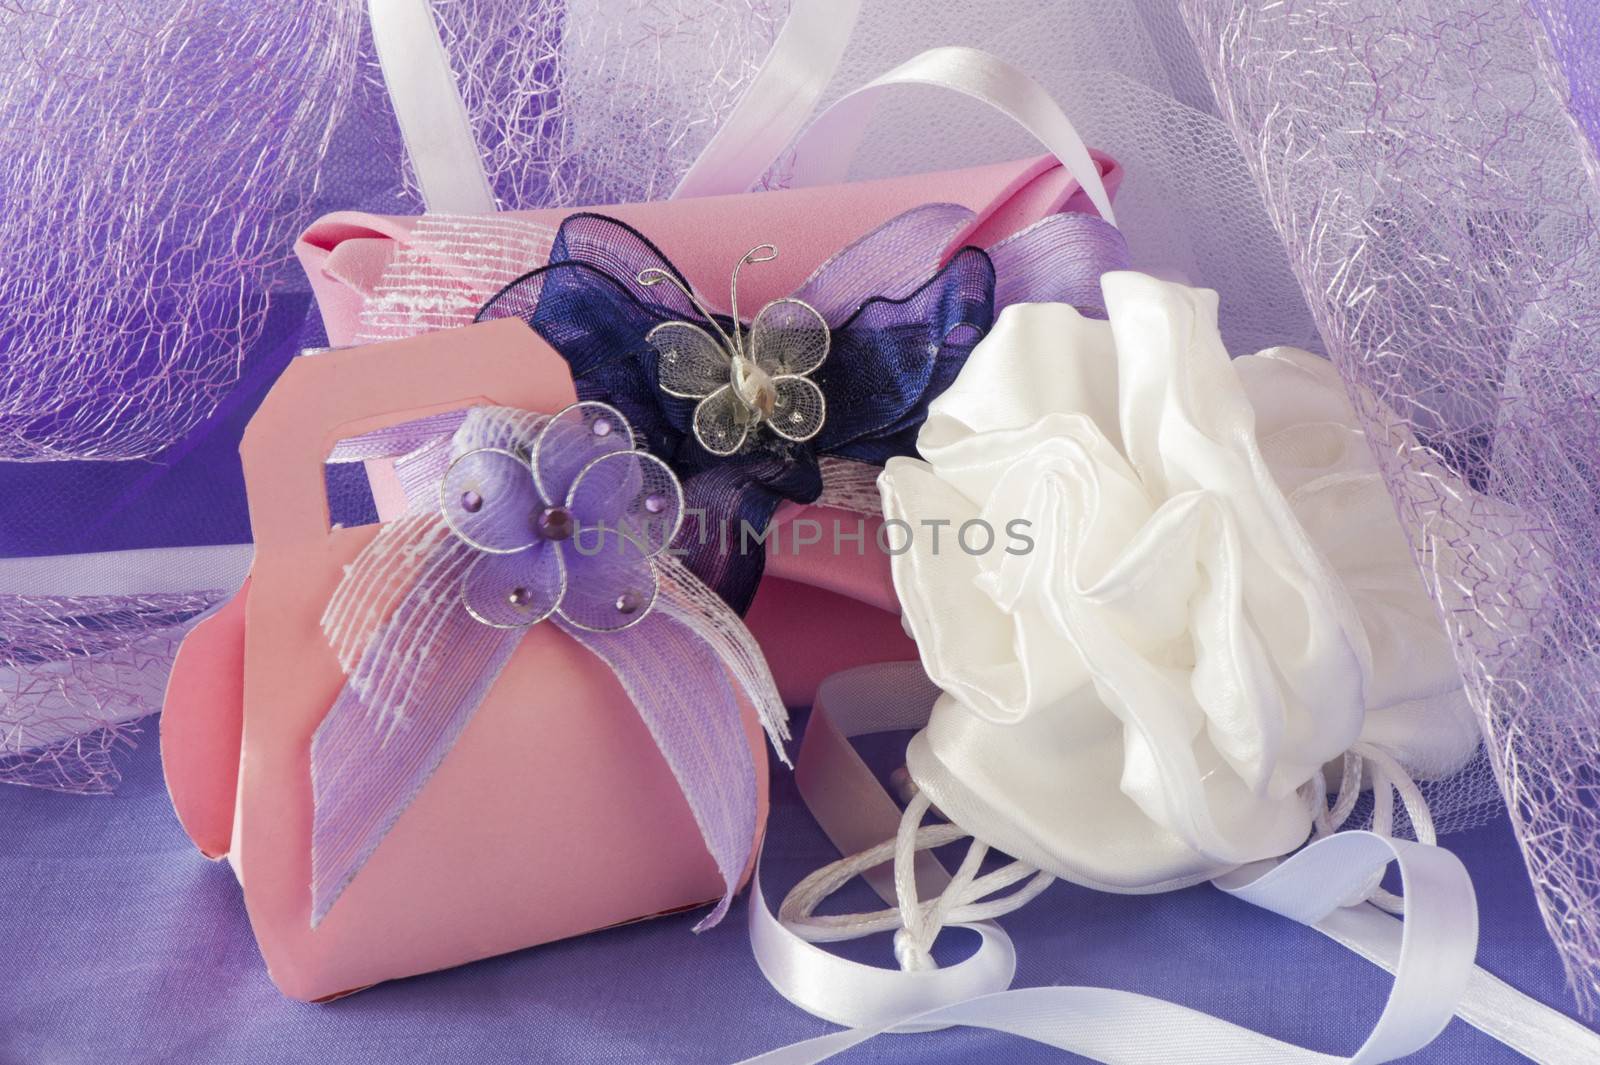 wedding favors for wedding and first communion